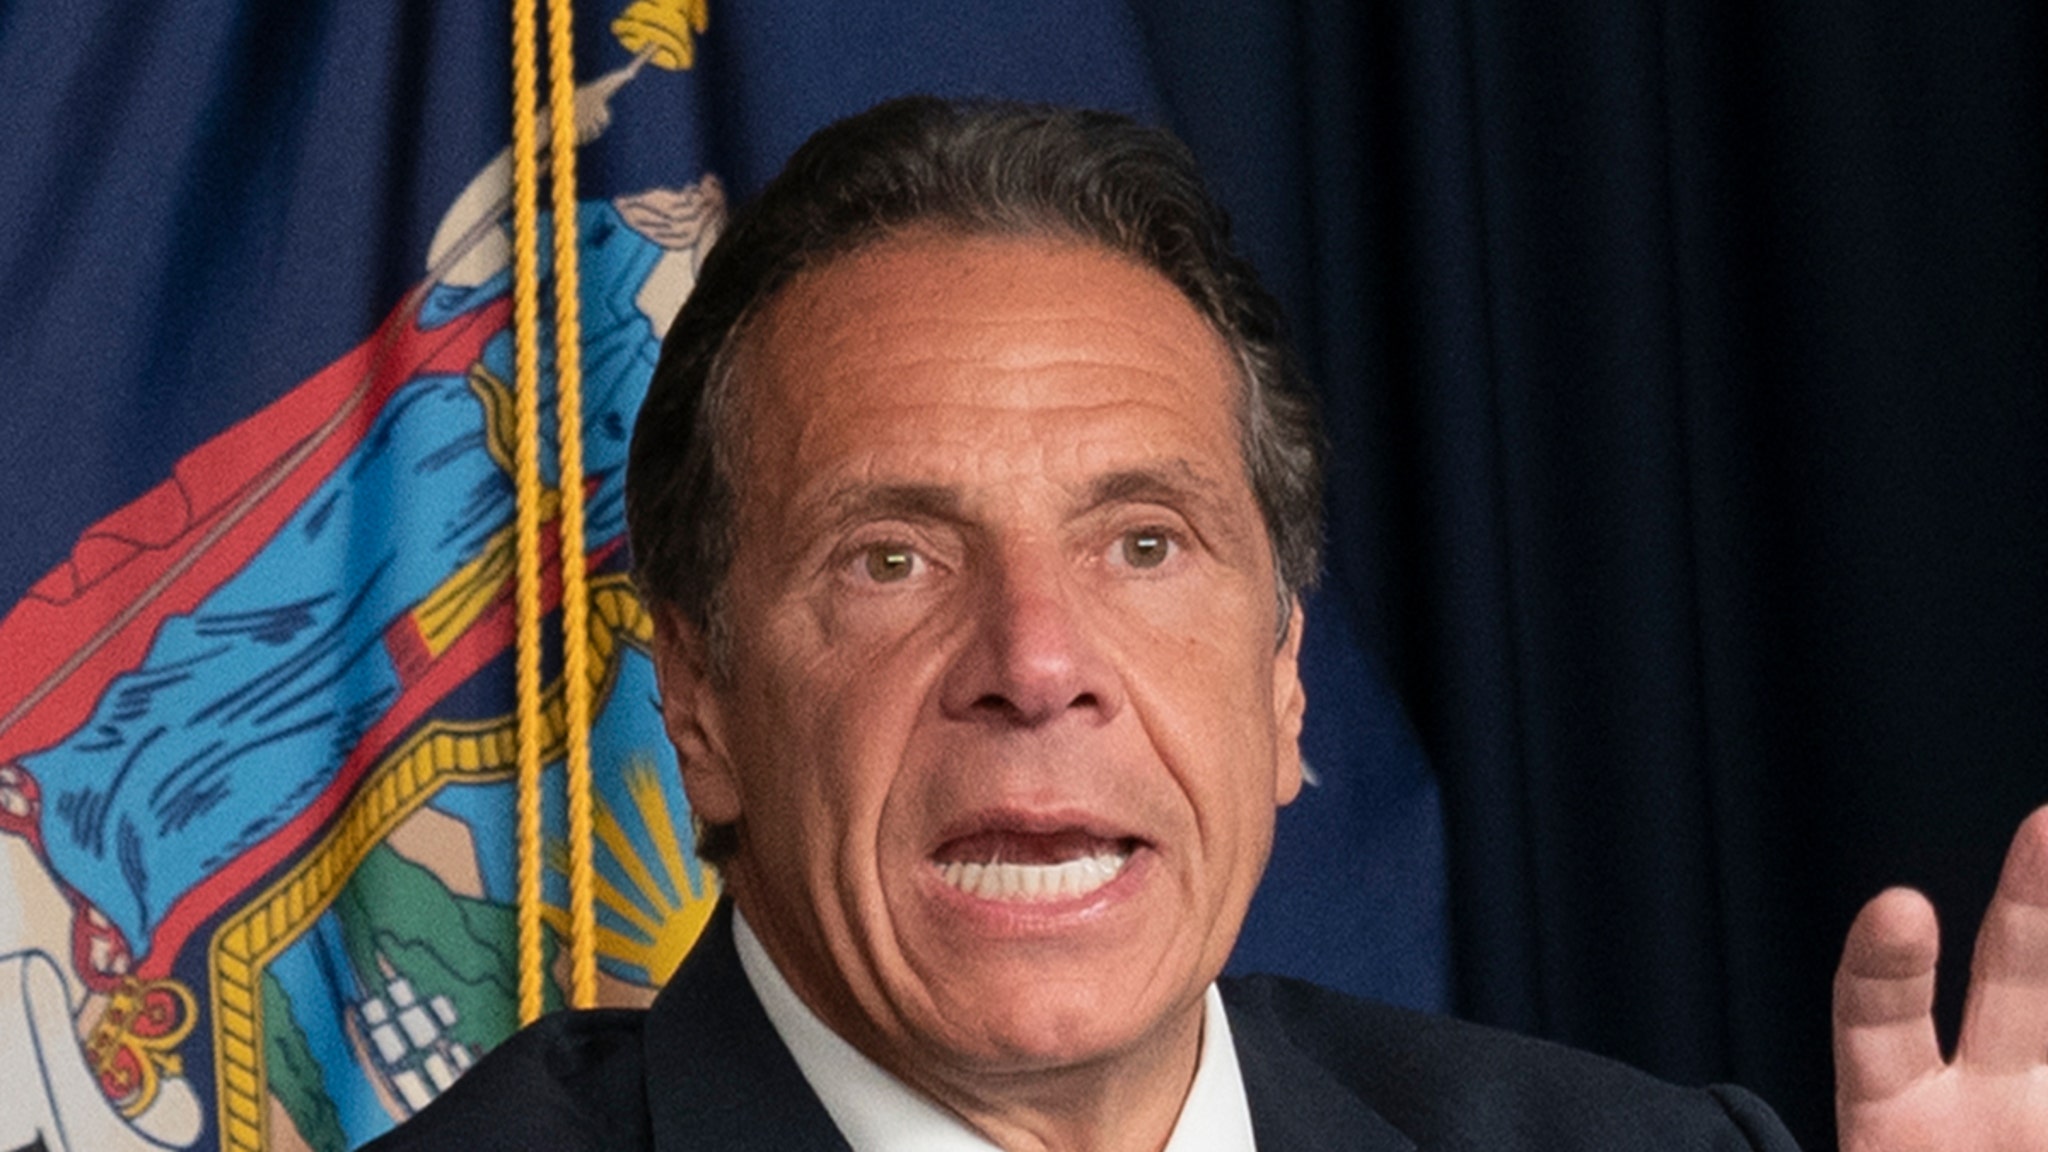 Andrew Cuomo loses Emmy award in sexual harassment scandal ...